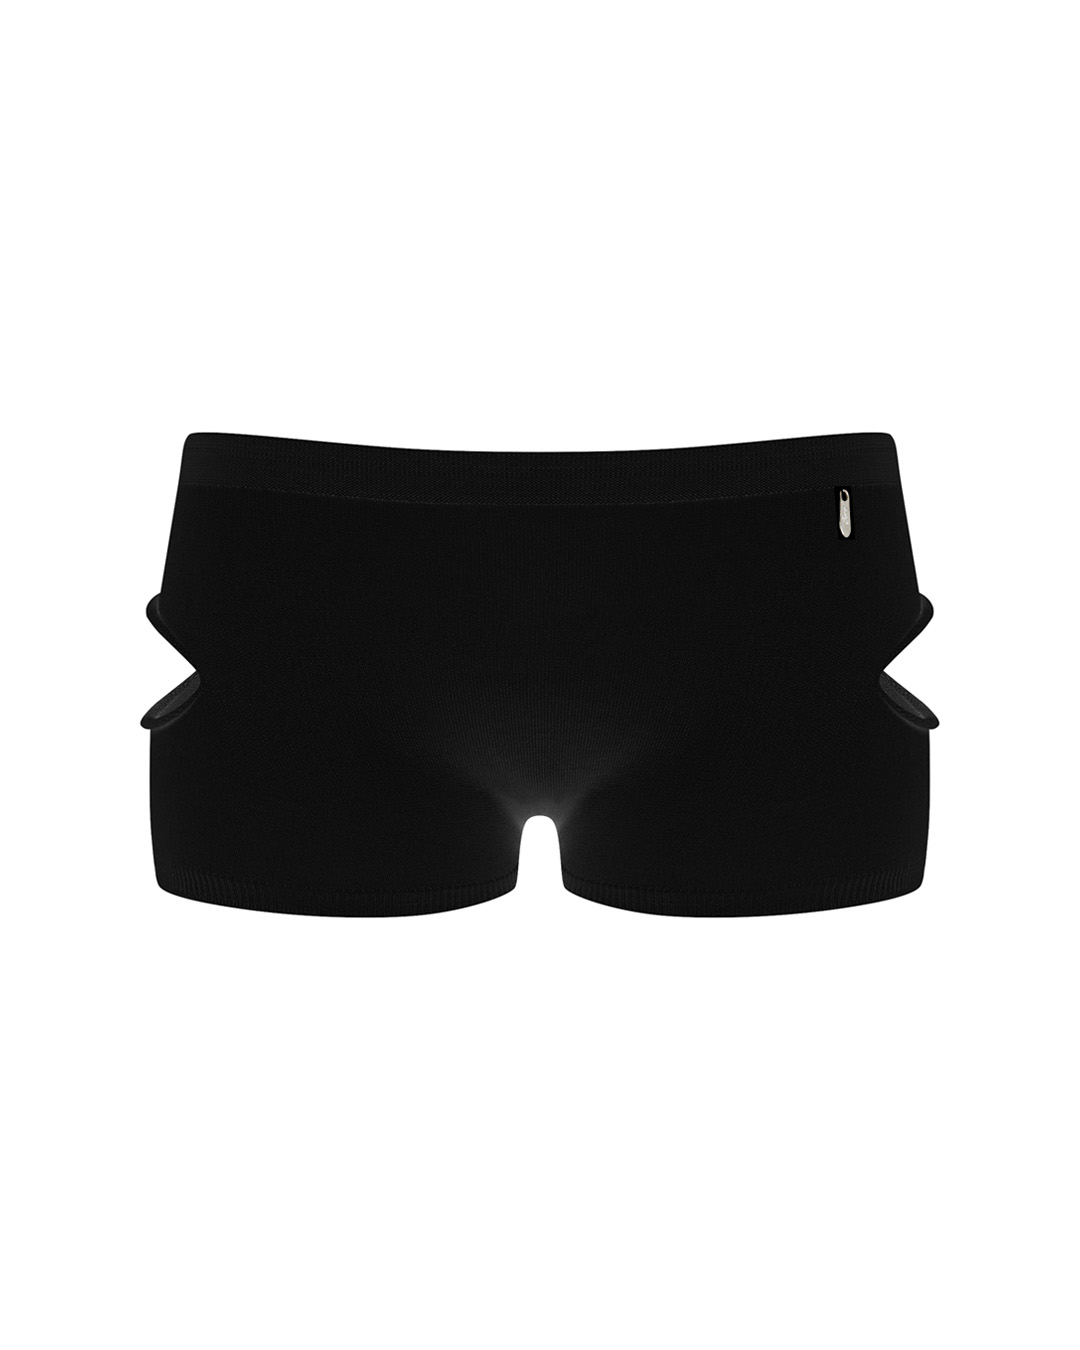 LOW WAIST BRIEF IN POLY / BLACK